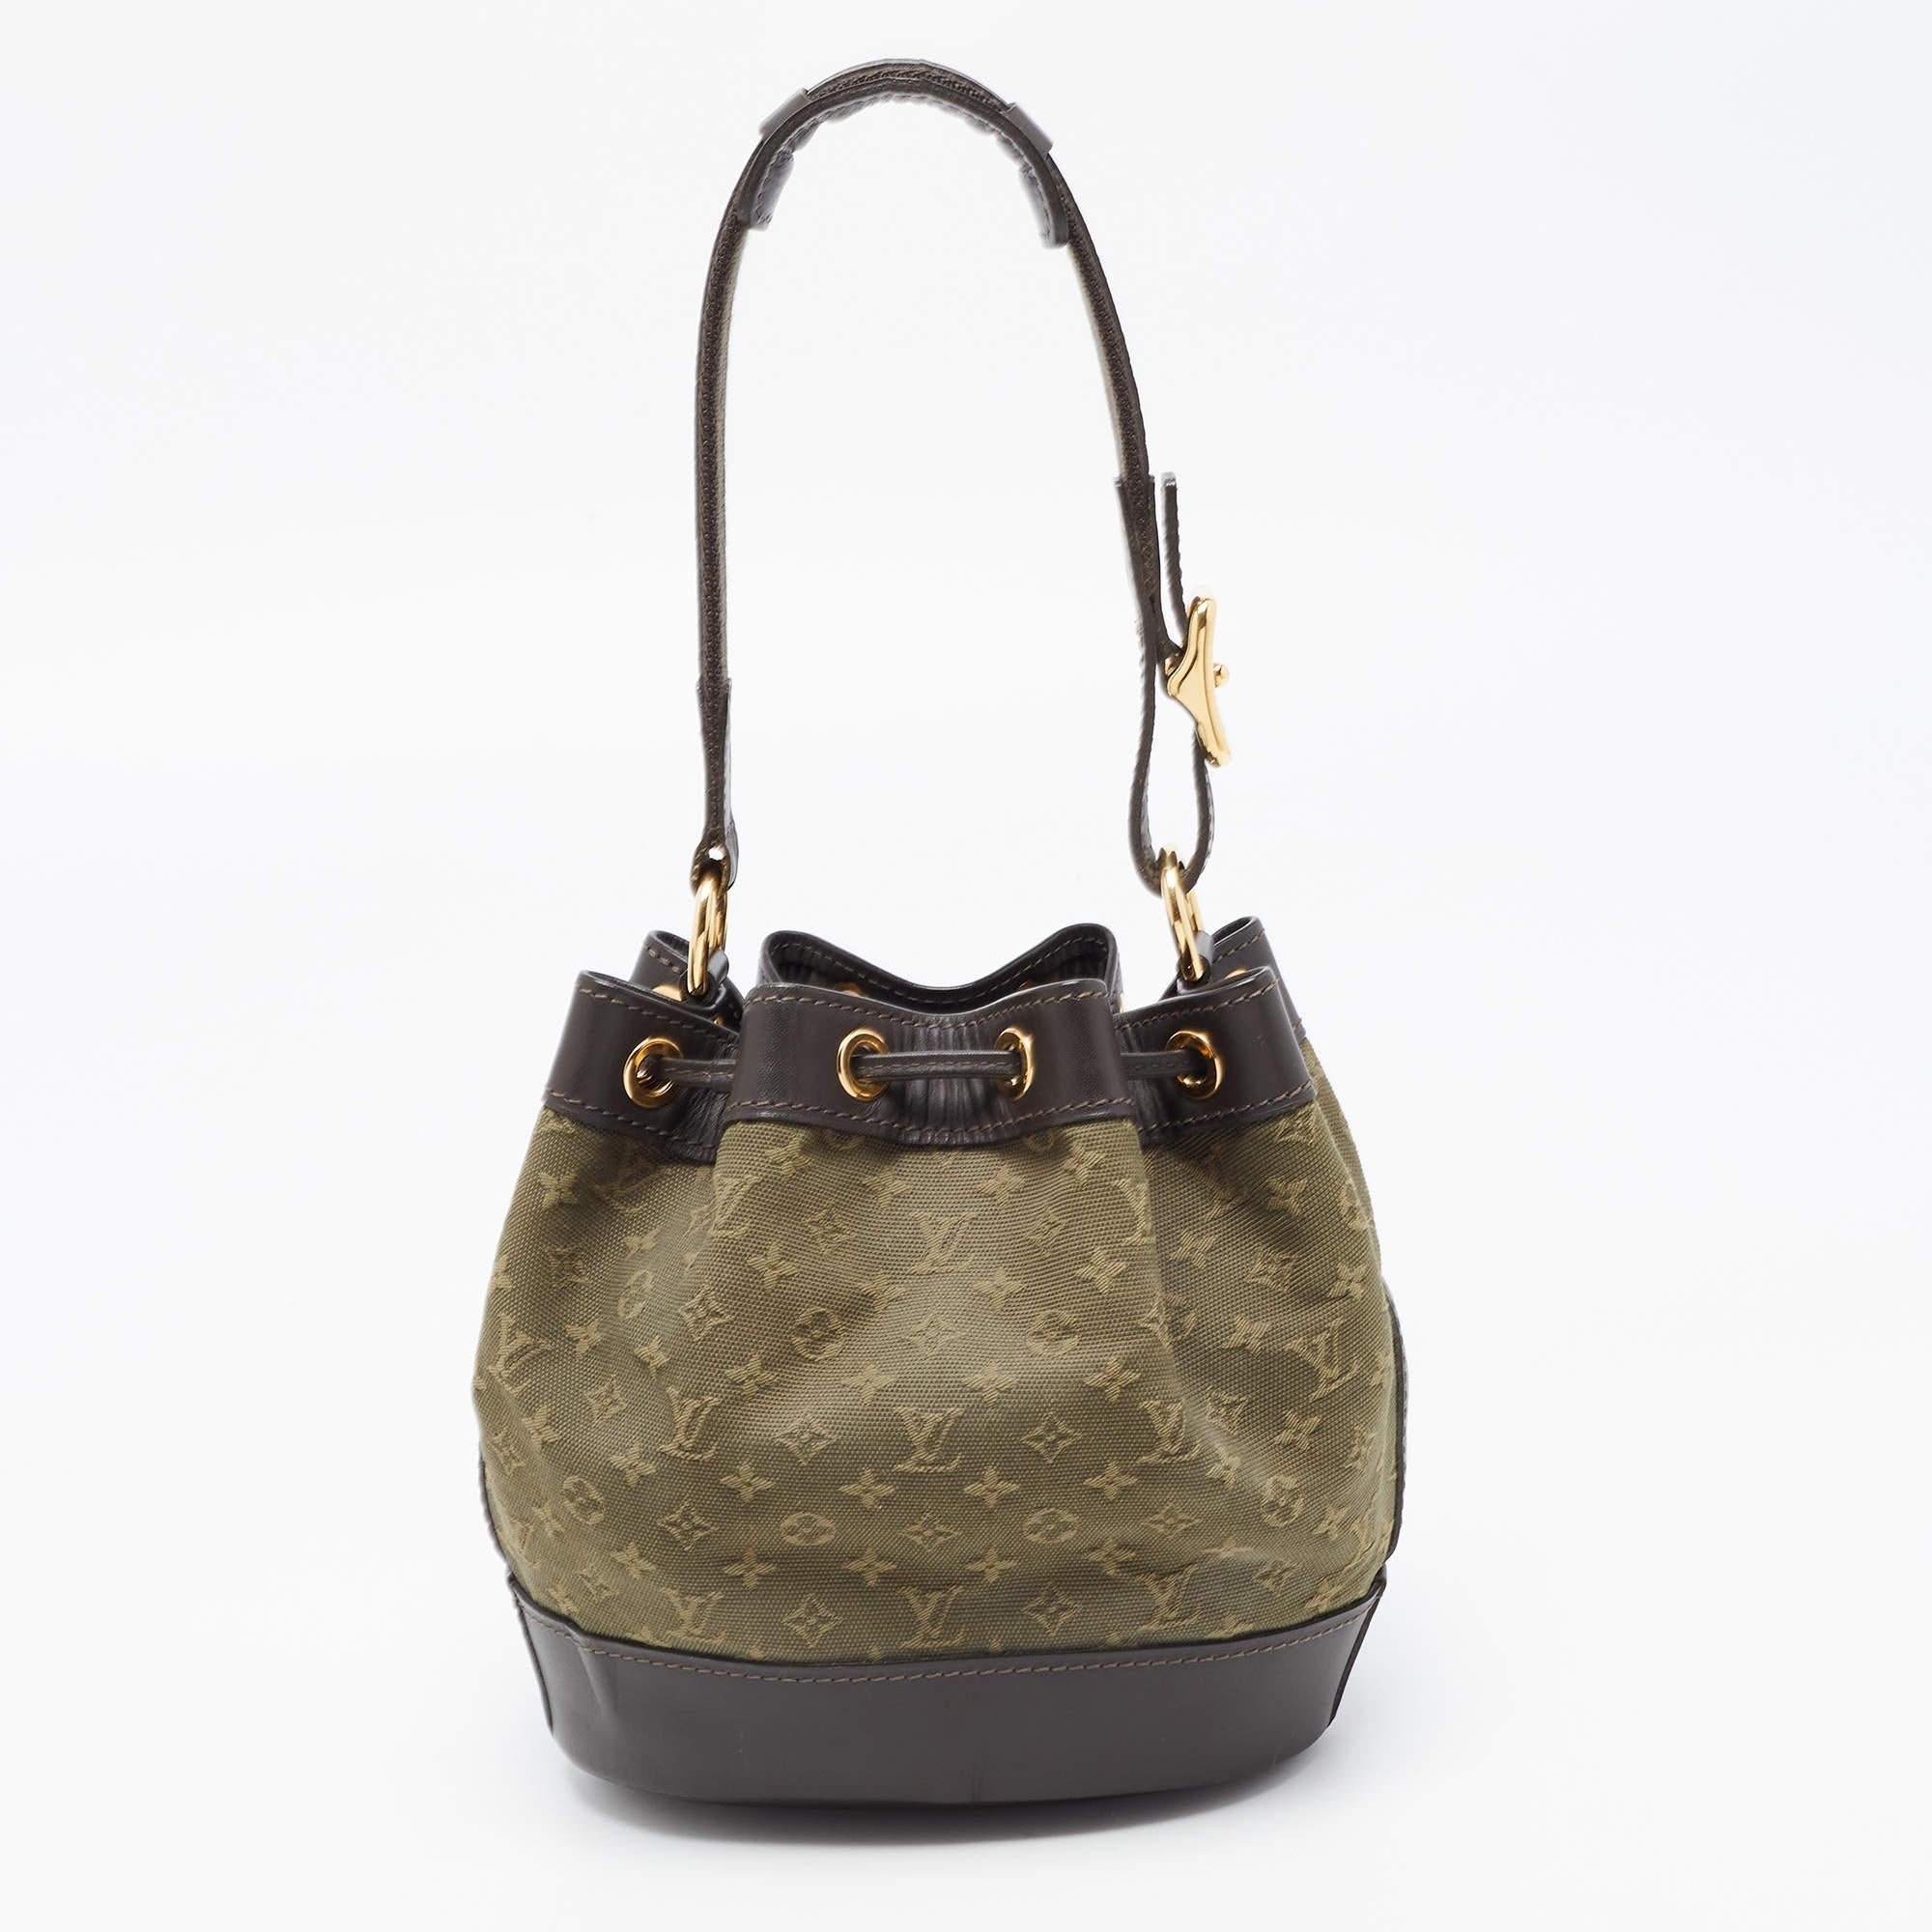 This Noelie in Mini Lin Monogram canvas comes in a bucket bag style. It has leather trims, a leather base, a single handle, and gold-tone hardware. The drawstring top secures a canvas-lined interior sized to hold your daily necessities.

